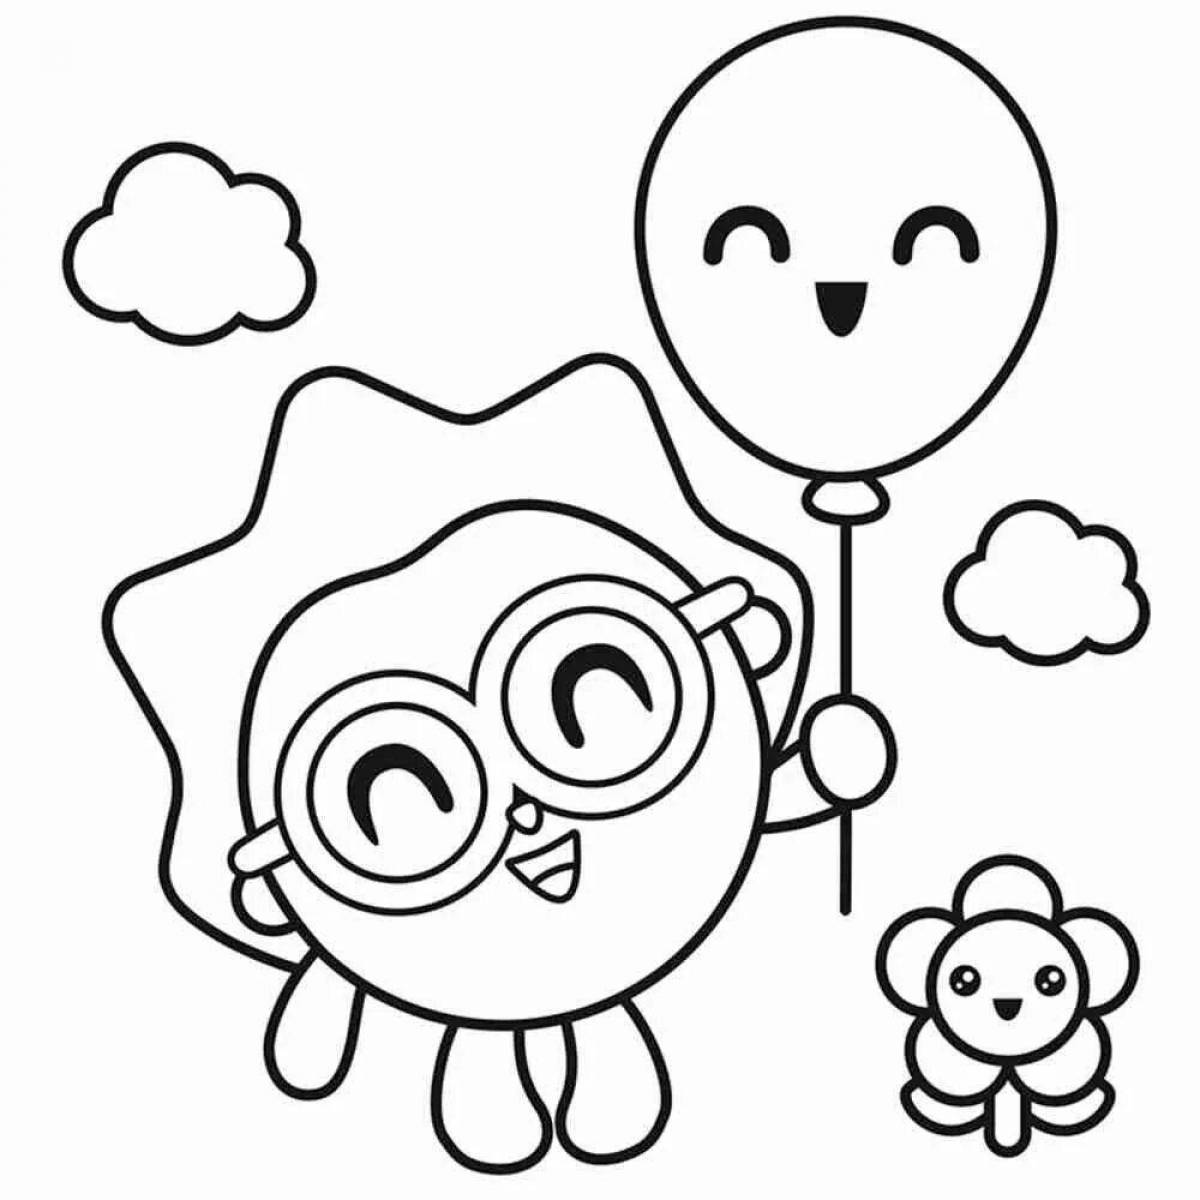 Coloured coloring book for toddler girls